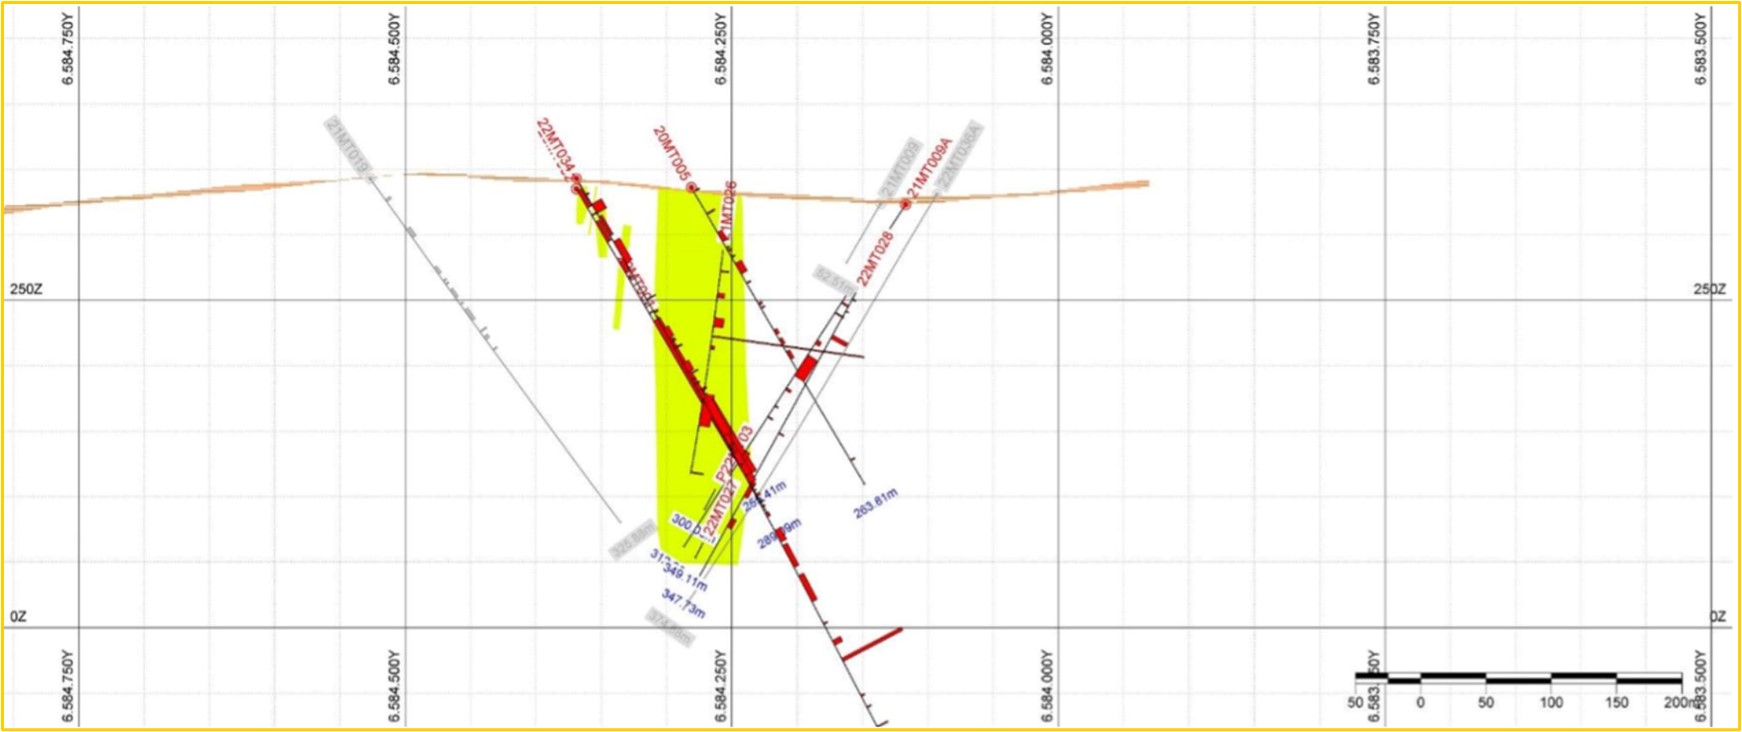 Cross section of Matilde gold zone looking east showing gold composites highlighting interpreted multiple higher grade gold intervals with broad based moderate gold grades.